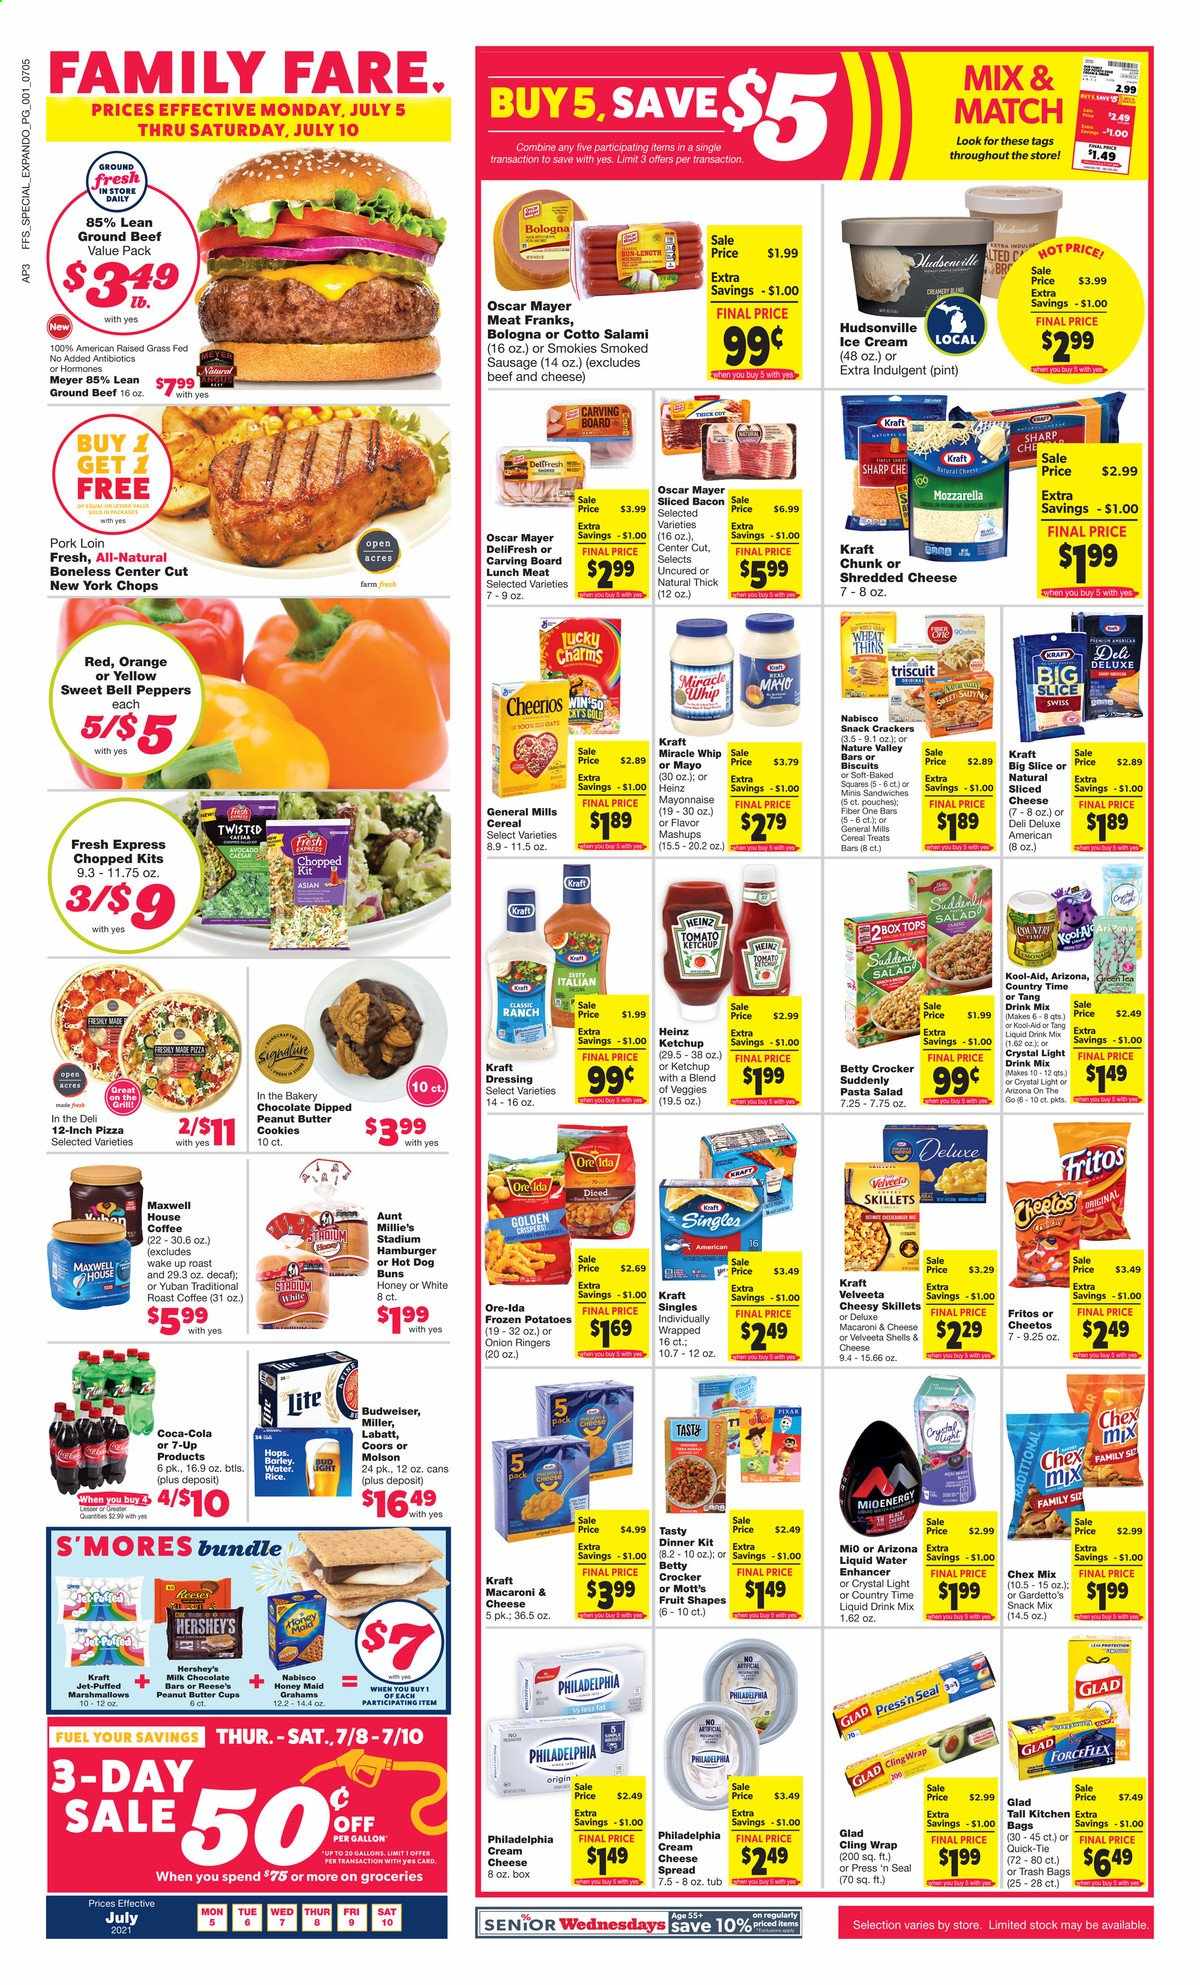 thumbnail - Family Fare Flyer - 07/05/2021 - 07/10/2021 - Sales products - Budweiser, Coors, buns, bell peppers, potatoes, onion, salad, peppers, oranges, Mott's, macaroni & cheese, hot dog, sandwich, hamburger, pasta, dinner kit, Kraft®, bacon, salami, Oscar Mayer, sausage, smoked sausage, cheese spread, pasta salad, lunch meat, cream cheese, shredded cheese, Philadelphia, mayonnaise, Miracle Whip, ice cream, Reese's, Hershey's, Ore-Ida, cookies, marshmallows, milk chocolate, snack, crackers, biscuit, peanut butter cups, Fritos, Cheetos, Thins, Chex Mix, Heinz, cereals, Cheerios, Honey Maid, Fiber One, rice, ketchup, dressing, Coca-Cola, 7UP, AriZona, coffee, beer, Miller, beef meat, ground beef, pork loin, pork meat, Jet, trash bags, gallon, Sharp. Page 1.